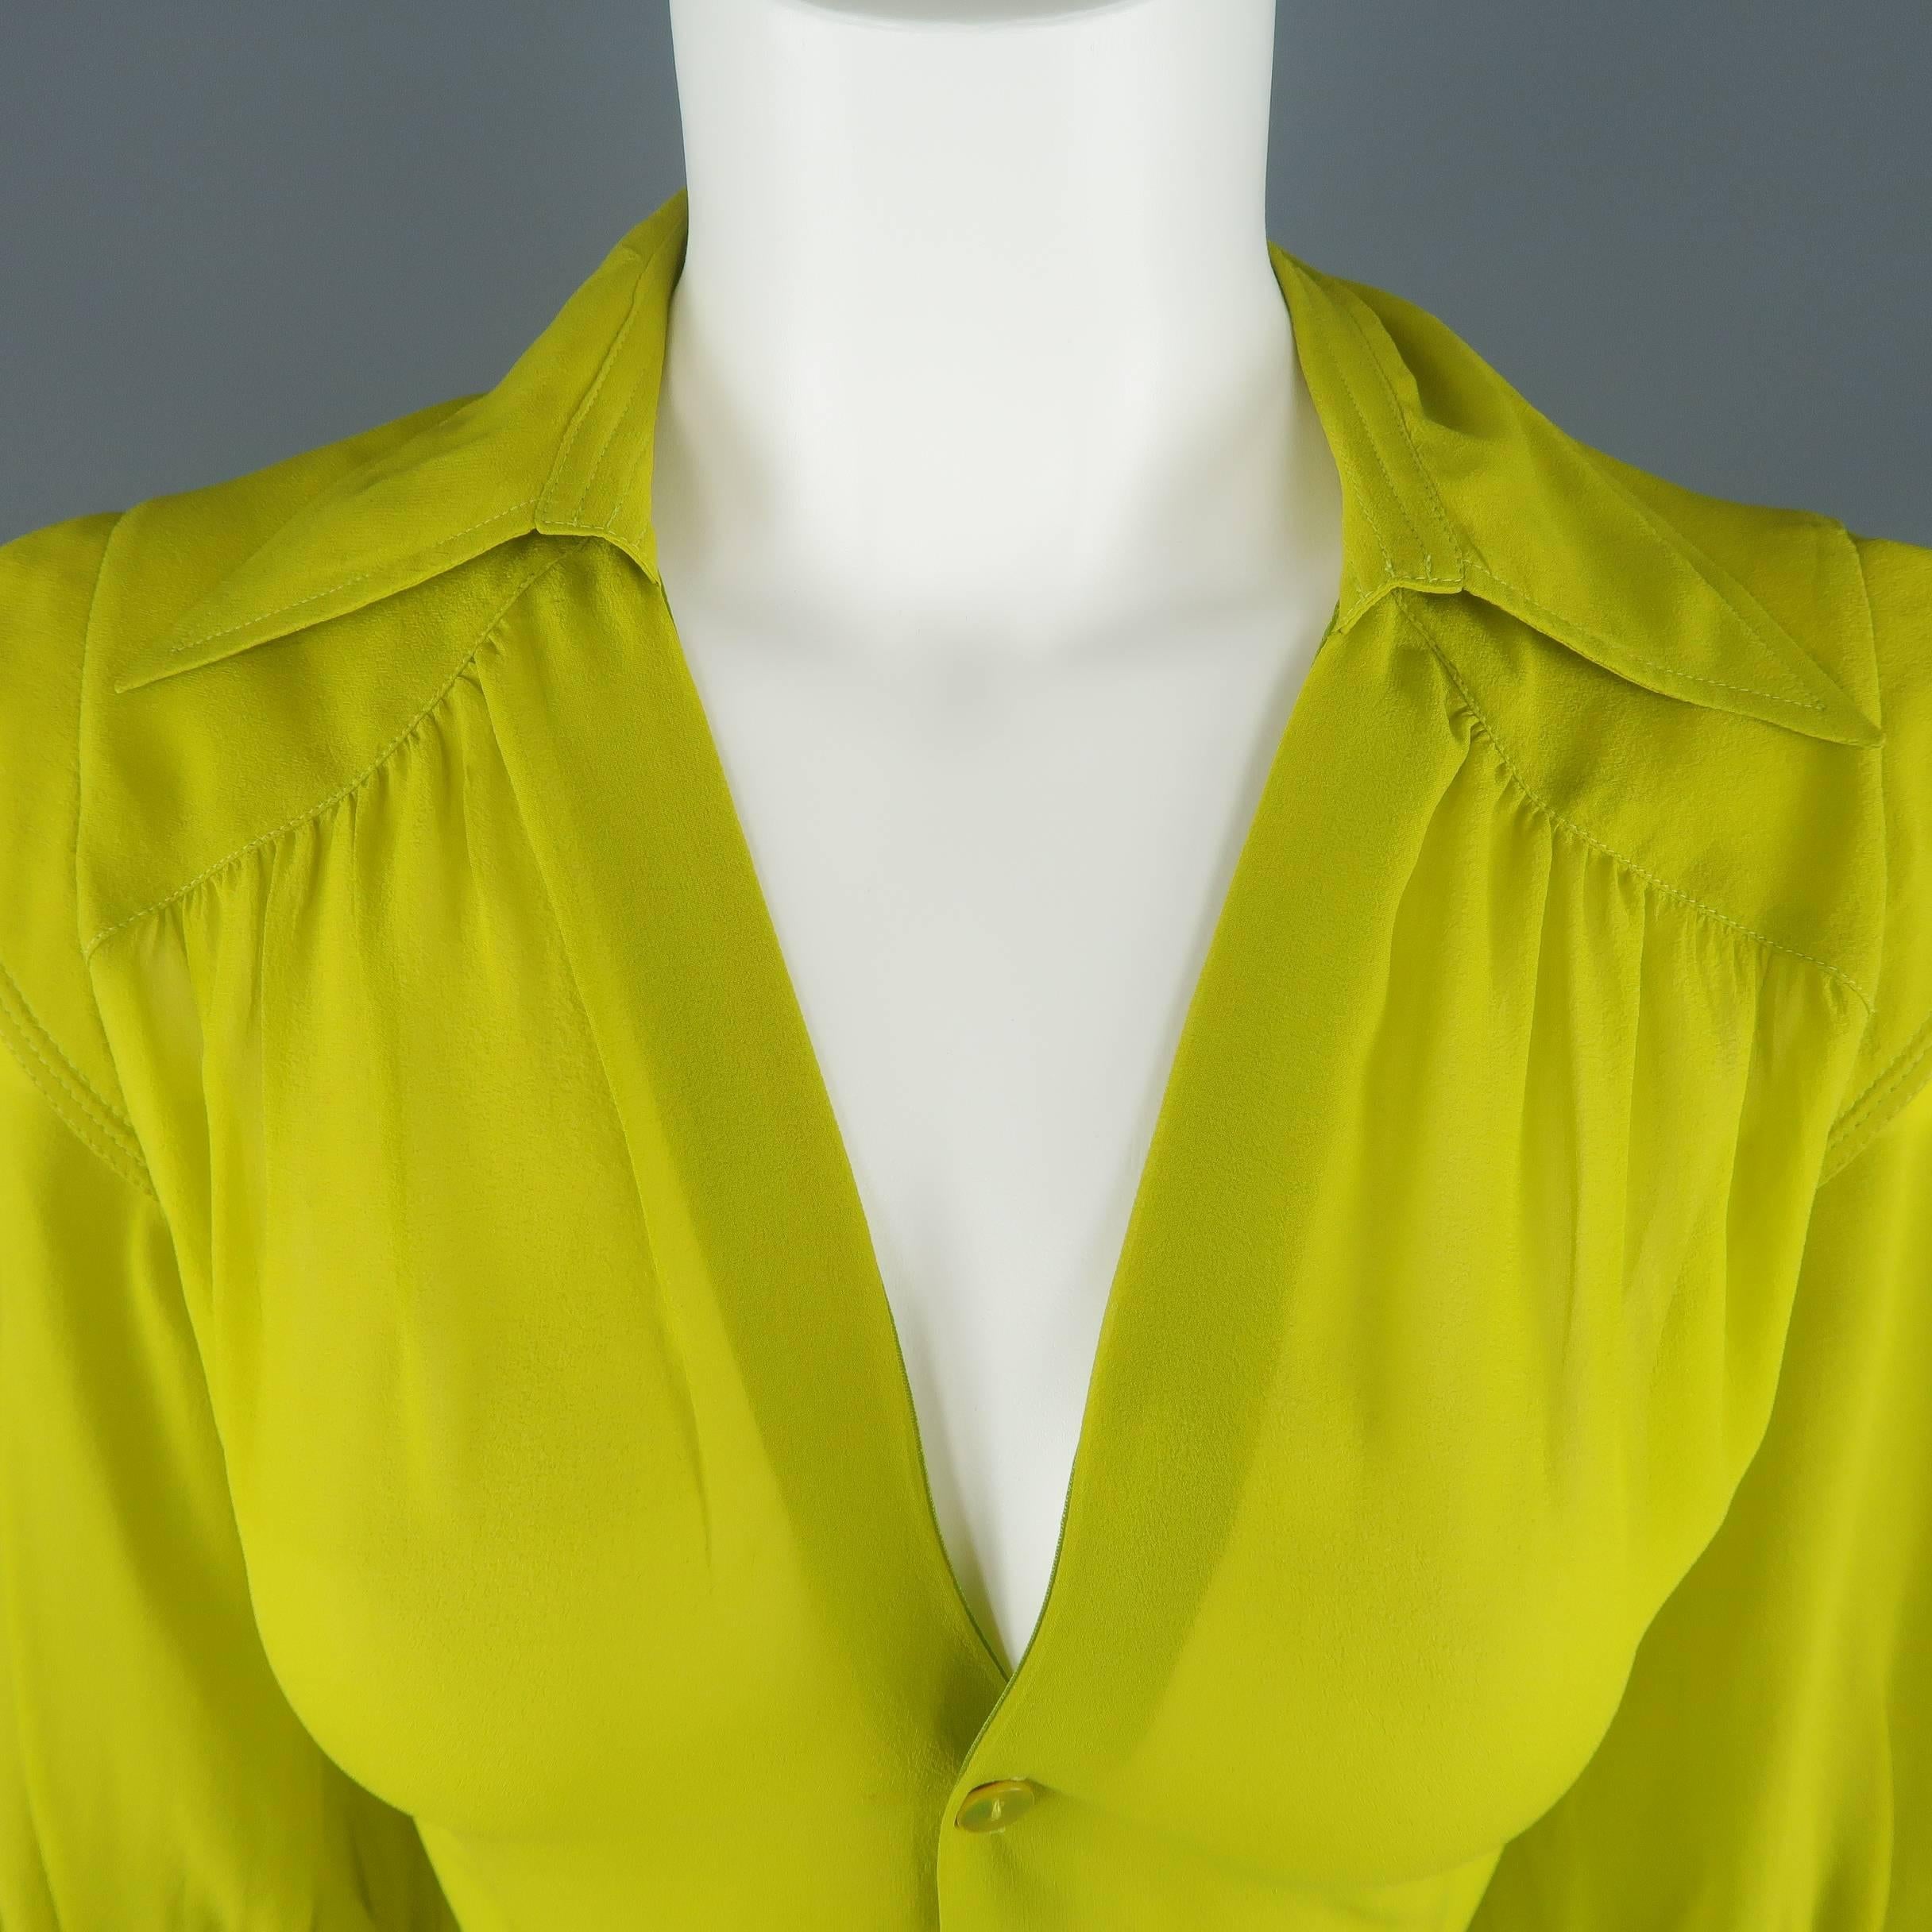 JEAN PAUL GAULTIER FEMME blouse comes in a gorgeous chartreuse yellow green silk crepe chiffon and features a pointed collar, open V neck with half button up front, gathered three quarter sleeves, and shoulder overlay detail. Made in Italy.
